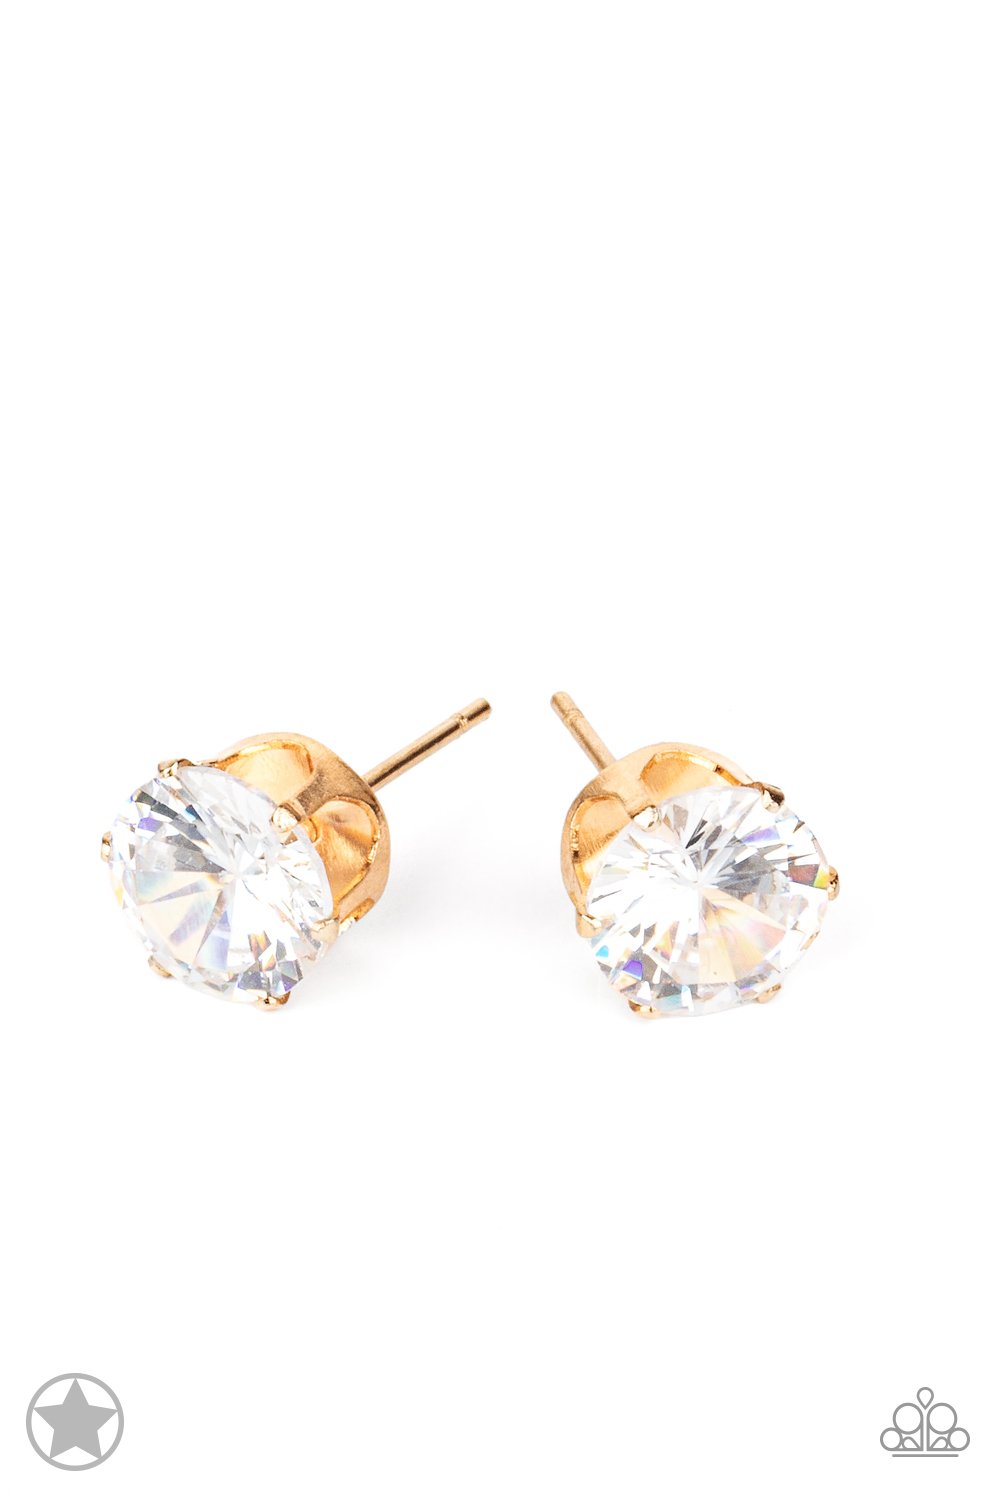 Just In Timeless Gold Earrings - Paparazzi